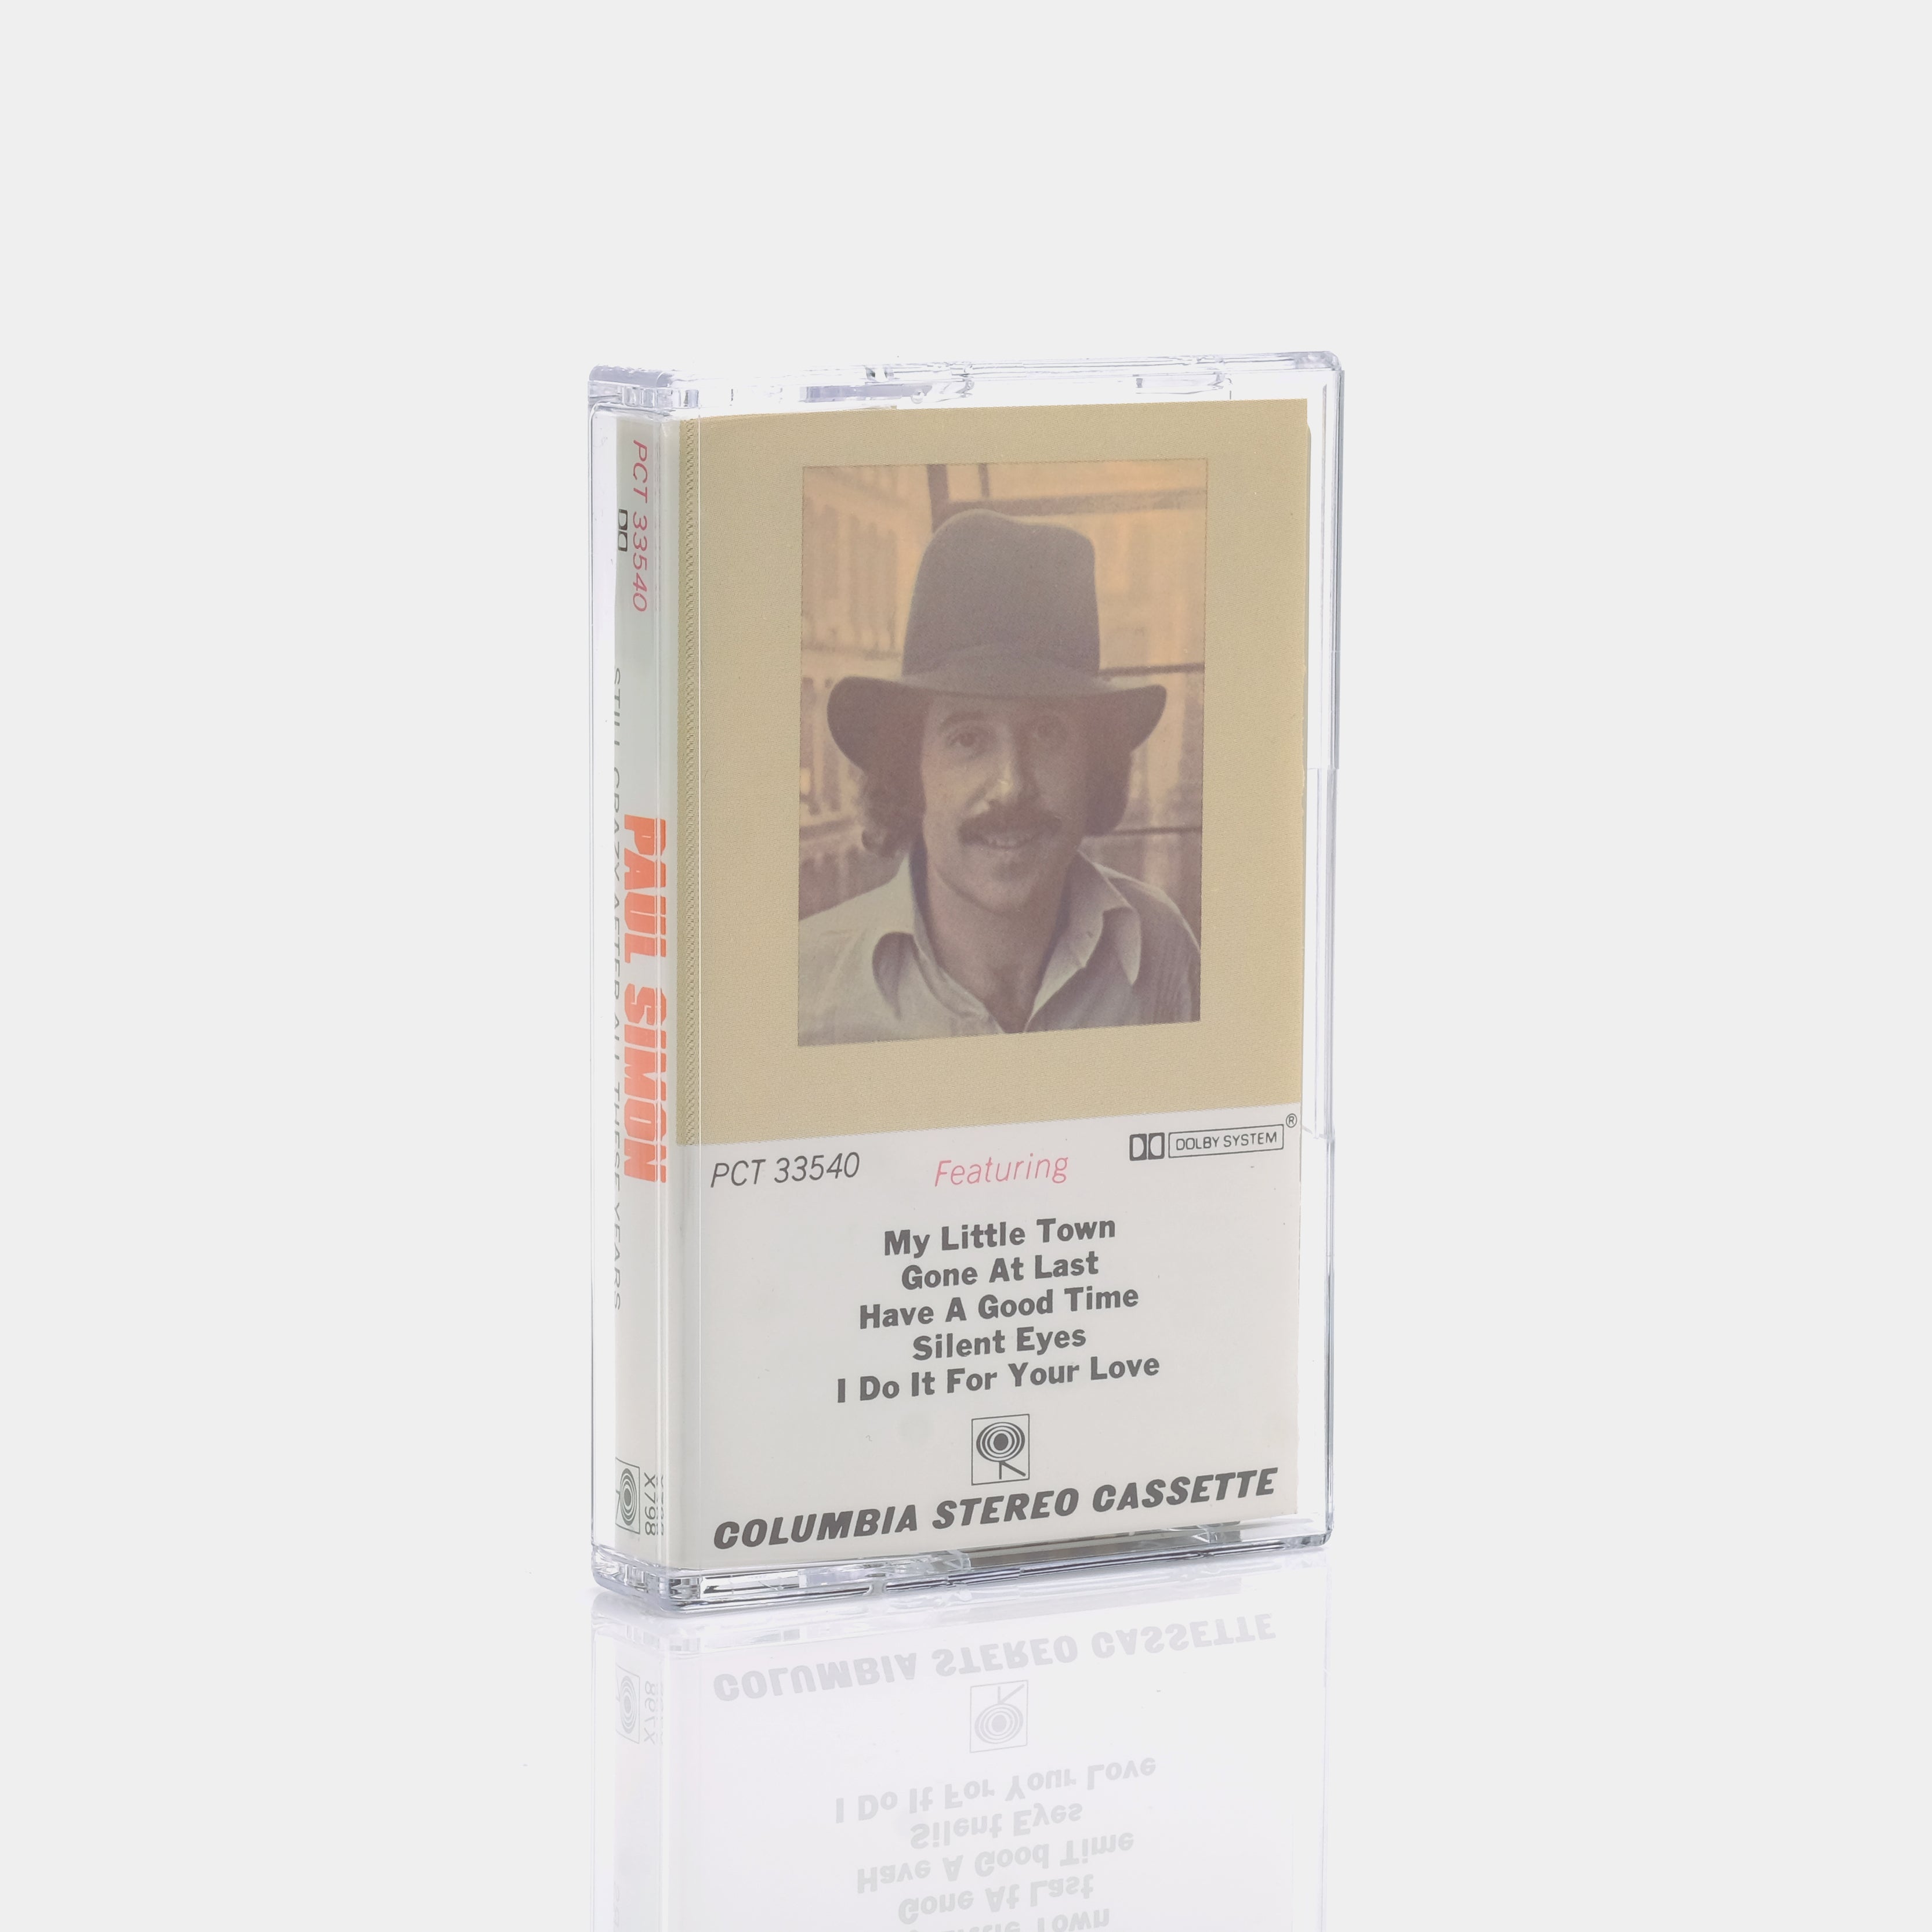 Paul Simon - Still Crazy After All These Years Cassette Tape